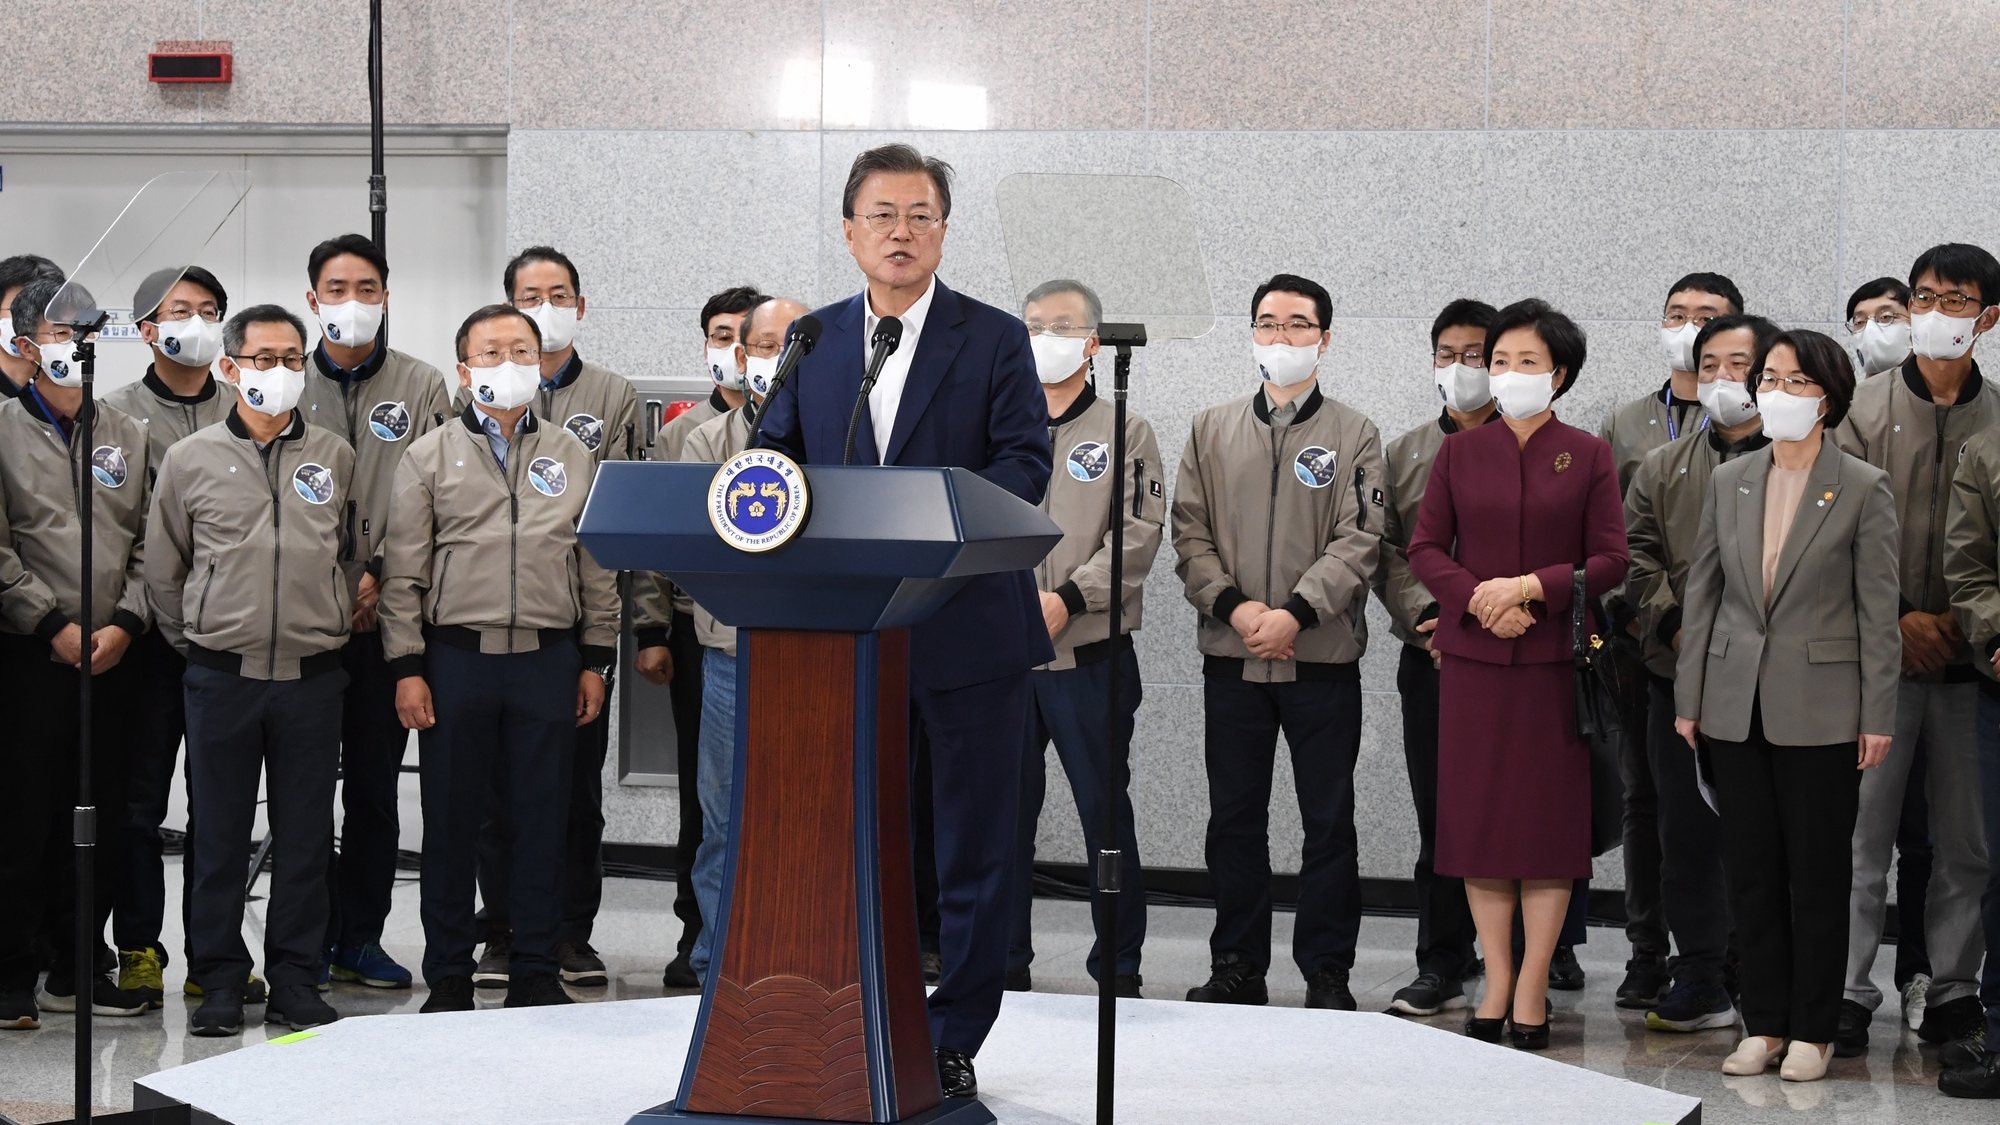 epa09535633 South Korean President Moon Jae-in delivers a public message after the country&#039;s first homegrown space launch vehicle, known as Nuri, lifted off from the Naro Space Center in Goheung, South Korea, 21 October 2021.  EPA/YONHAP SOUTH KOREA OUT